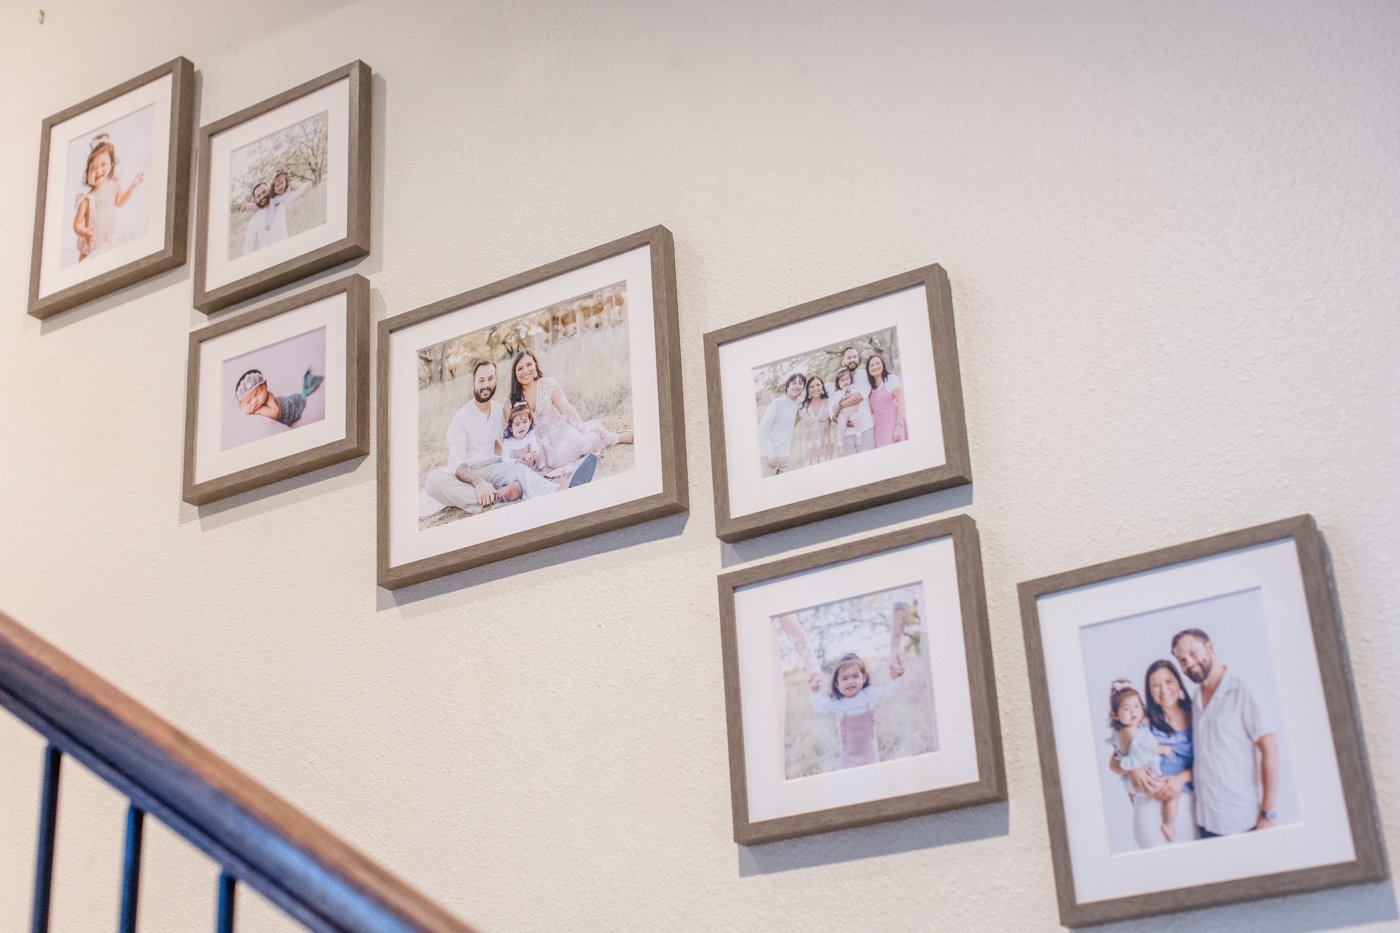 Staircase gallery wall design for family in Austin, TX. Design and photos by Sana Ahmed Photography.